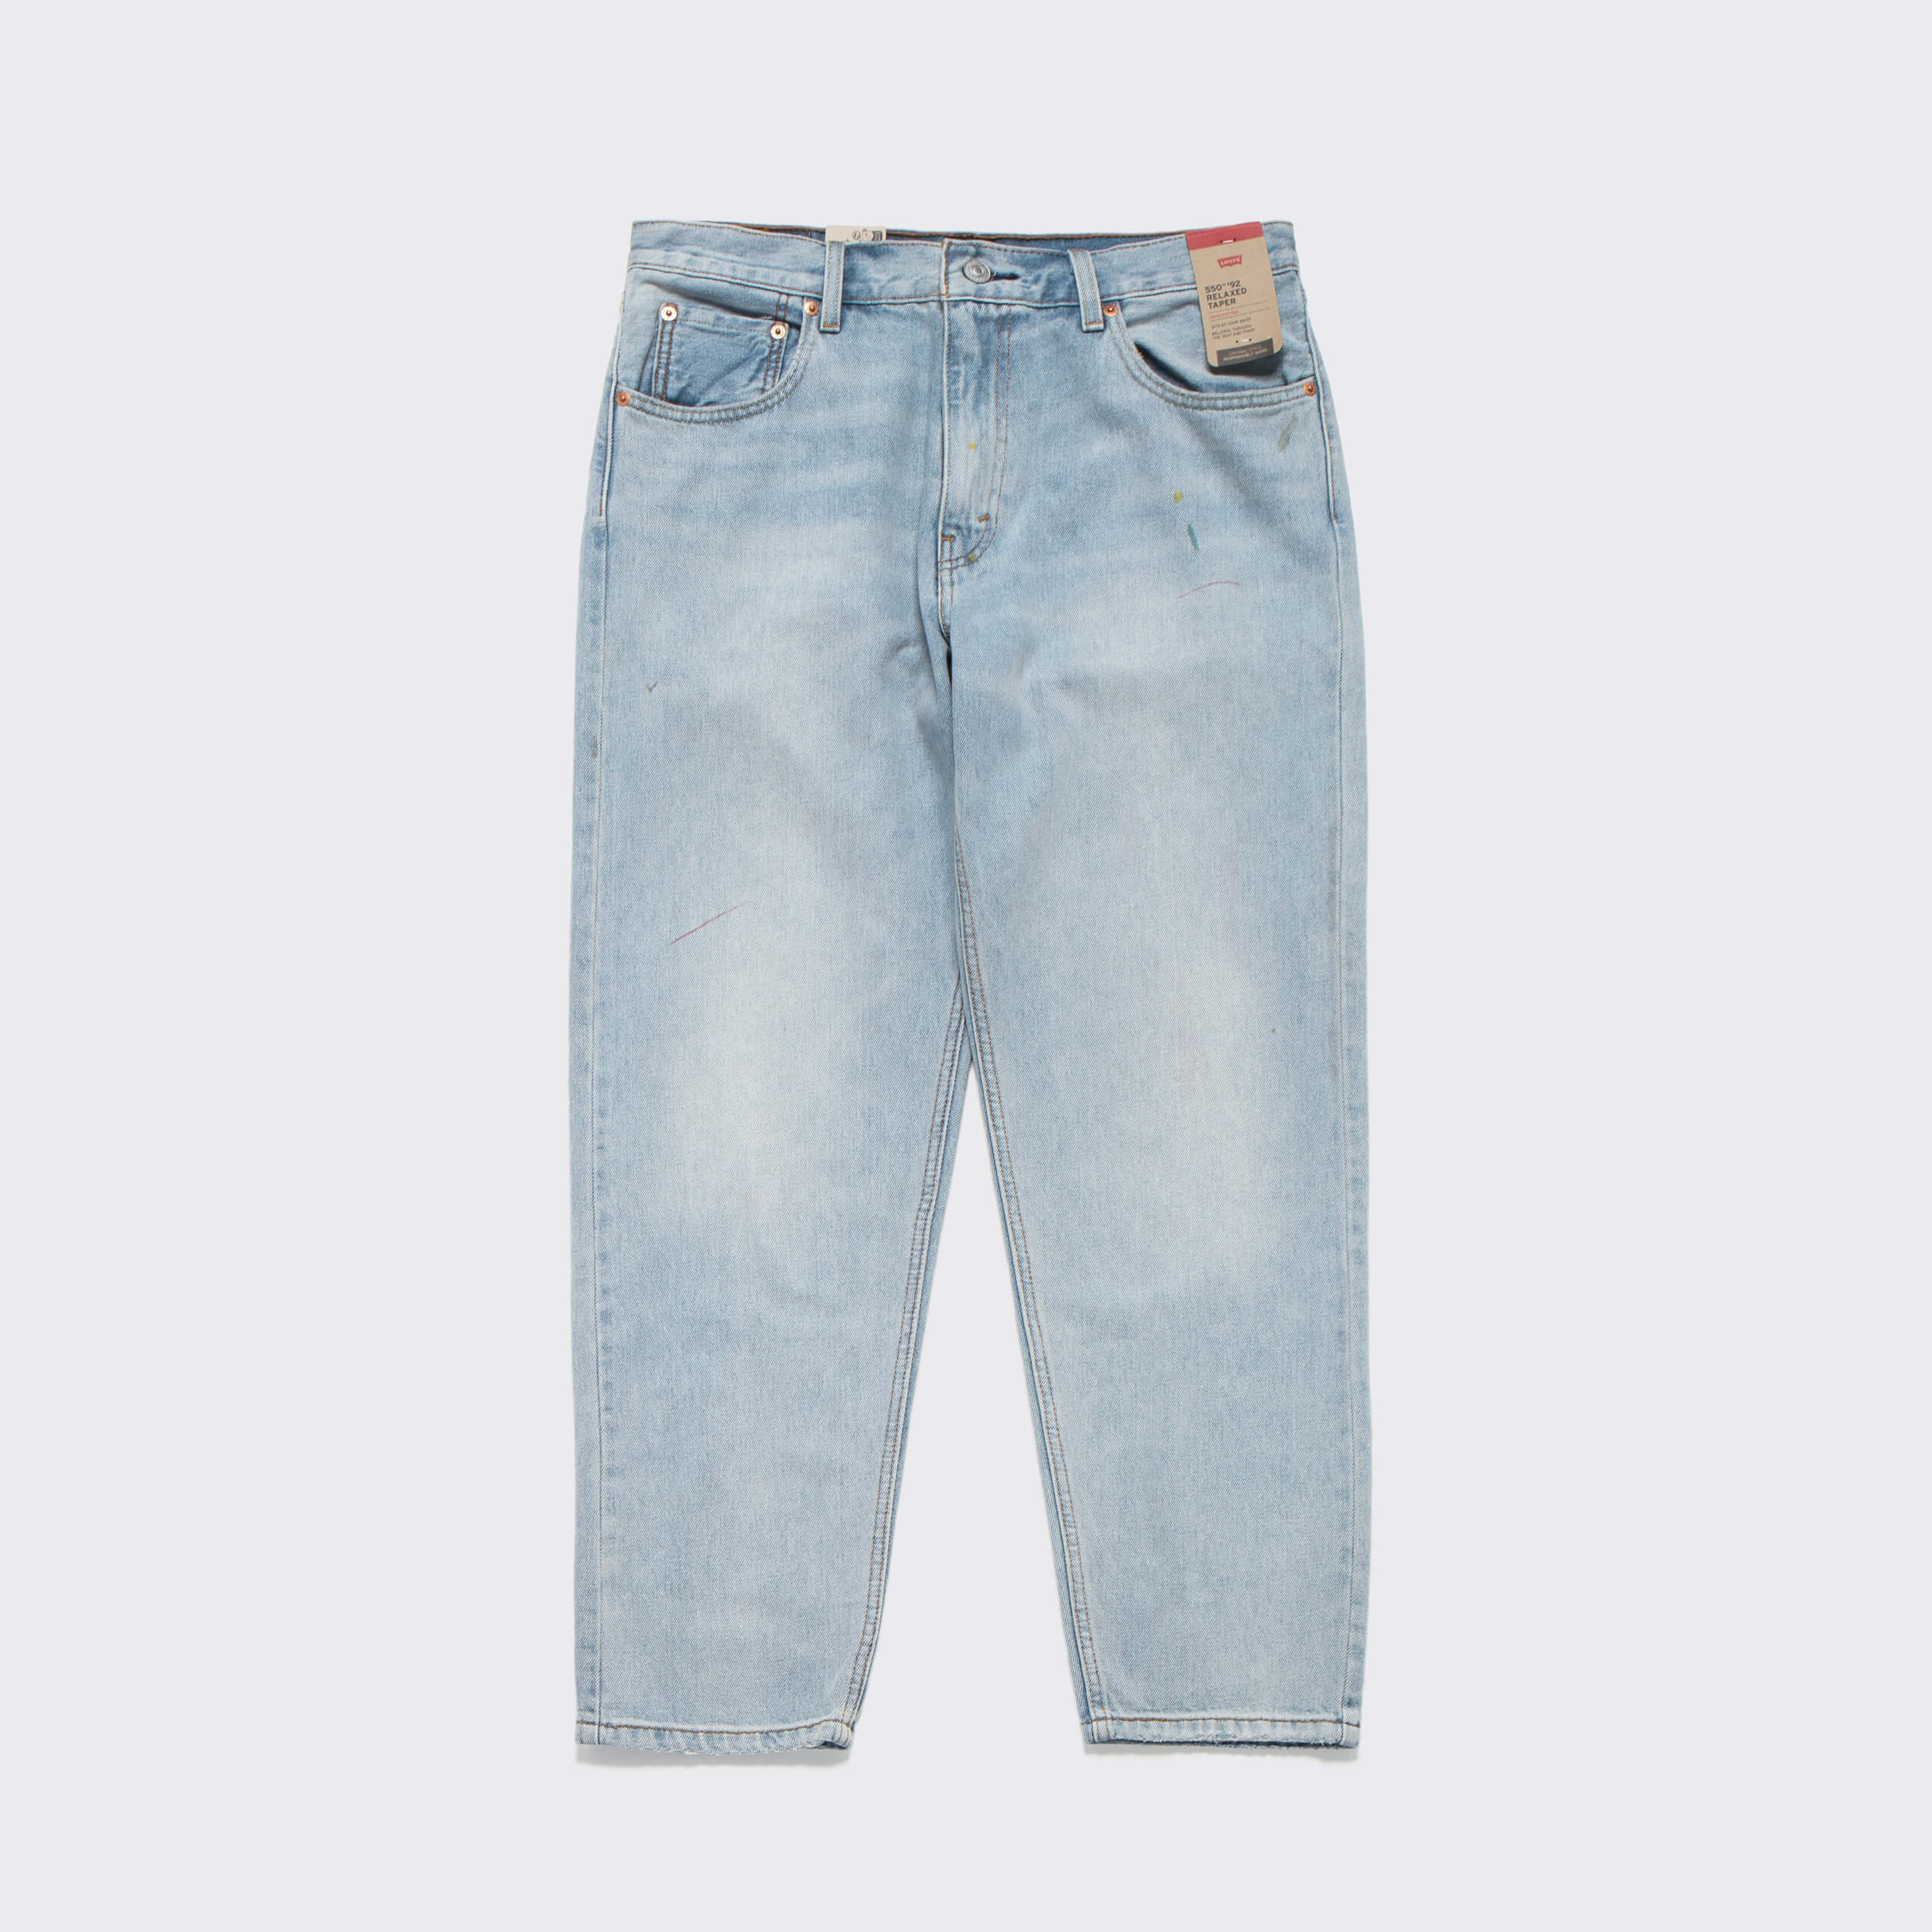 550-92-relaxed-tapered-jeans-light-denim_p2